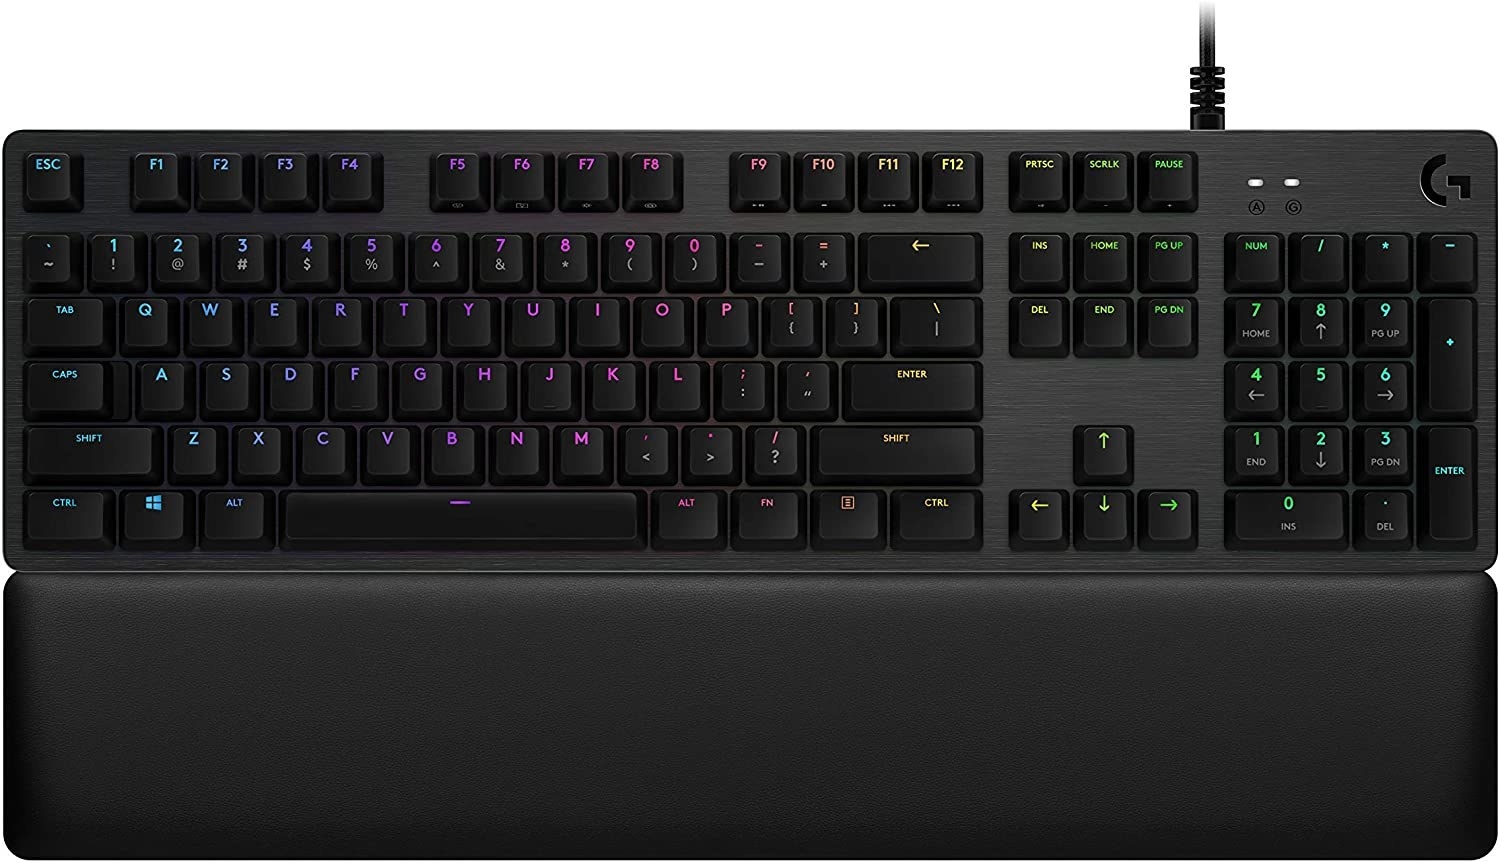 The gaming keyboard on a blank background